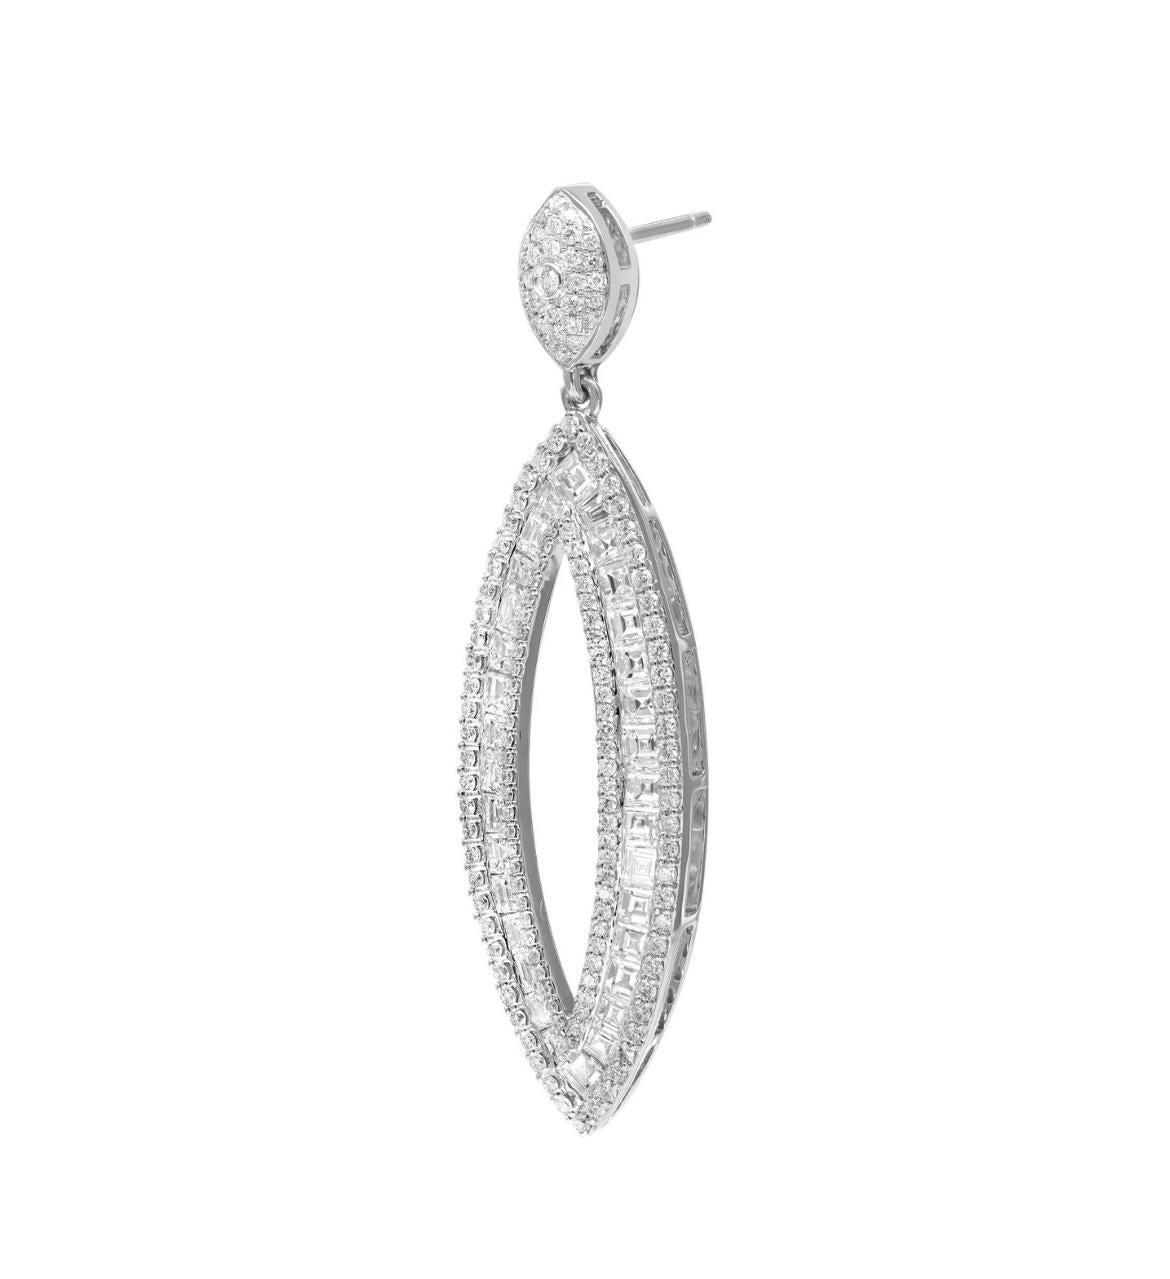 Experience the epitome of luxury with these exquisite diamond drop earrings. Crafted to perfection, these earrings feature a mesmerizing combination of channel-set princess-cut diamonds and prong-set round brilliant-cut diamonds. The diamonds